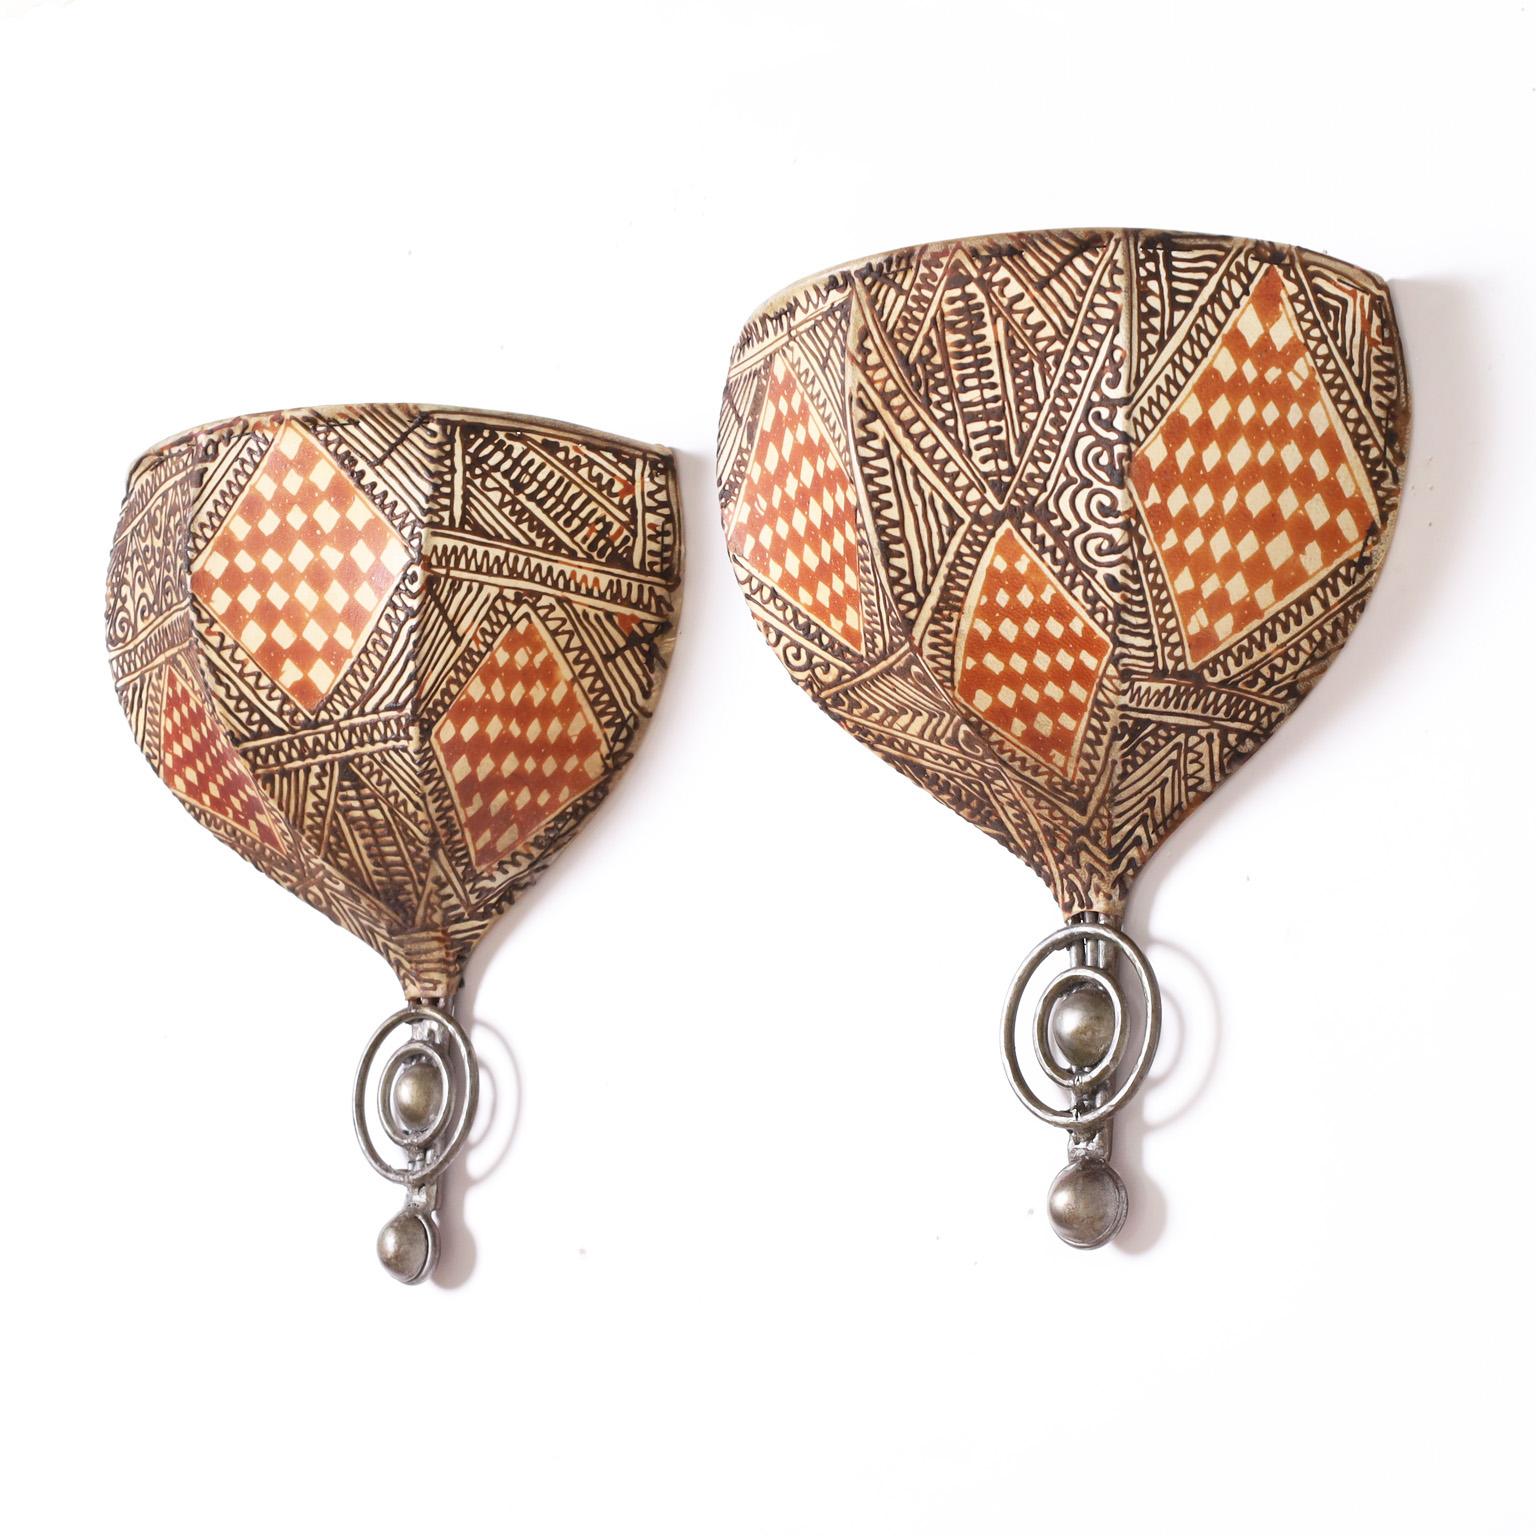 Standout pair of wall sconces handcrafted with metal frames covered in parchment or vellum and paint decorated with floral and geometric mediterranean designs.